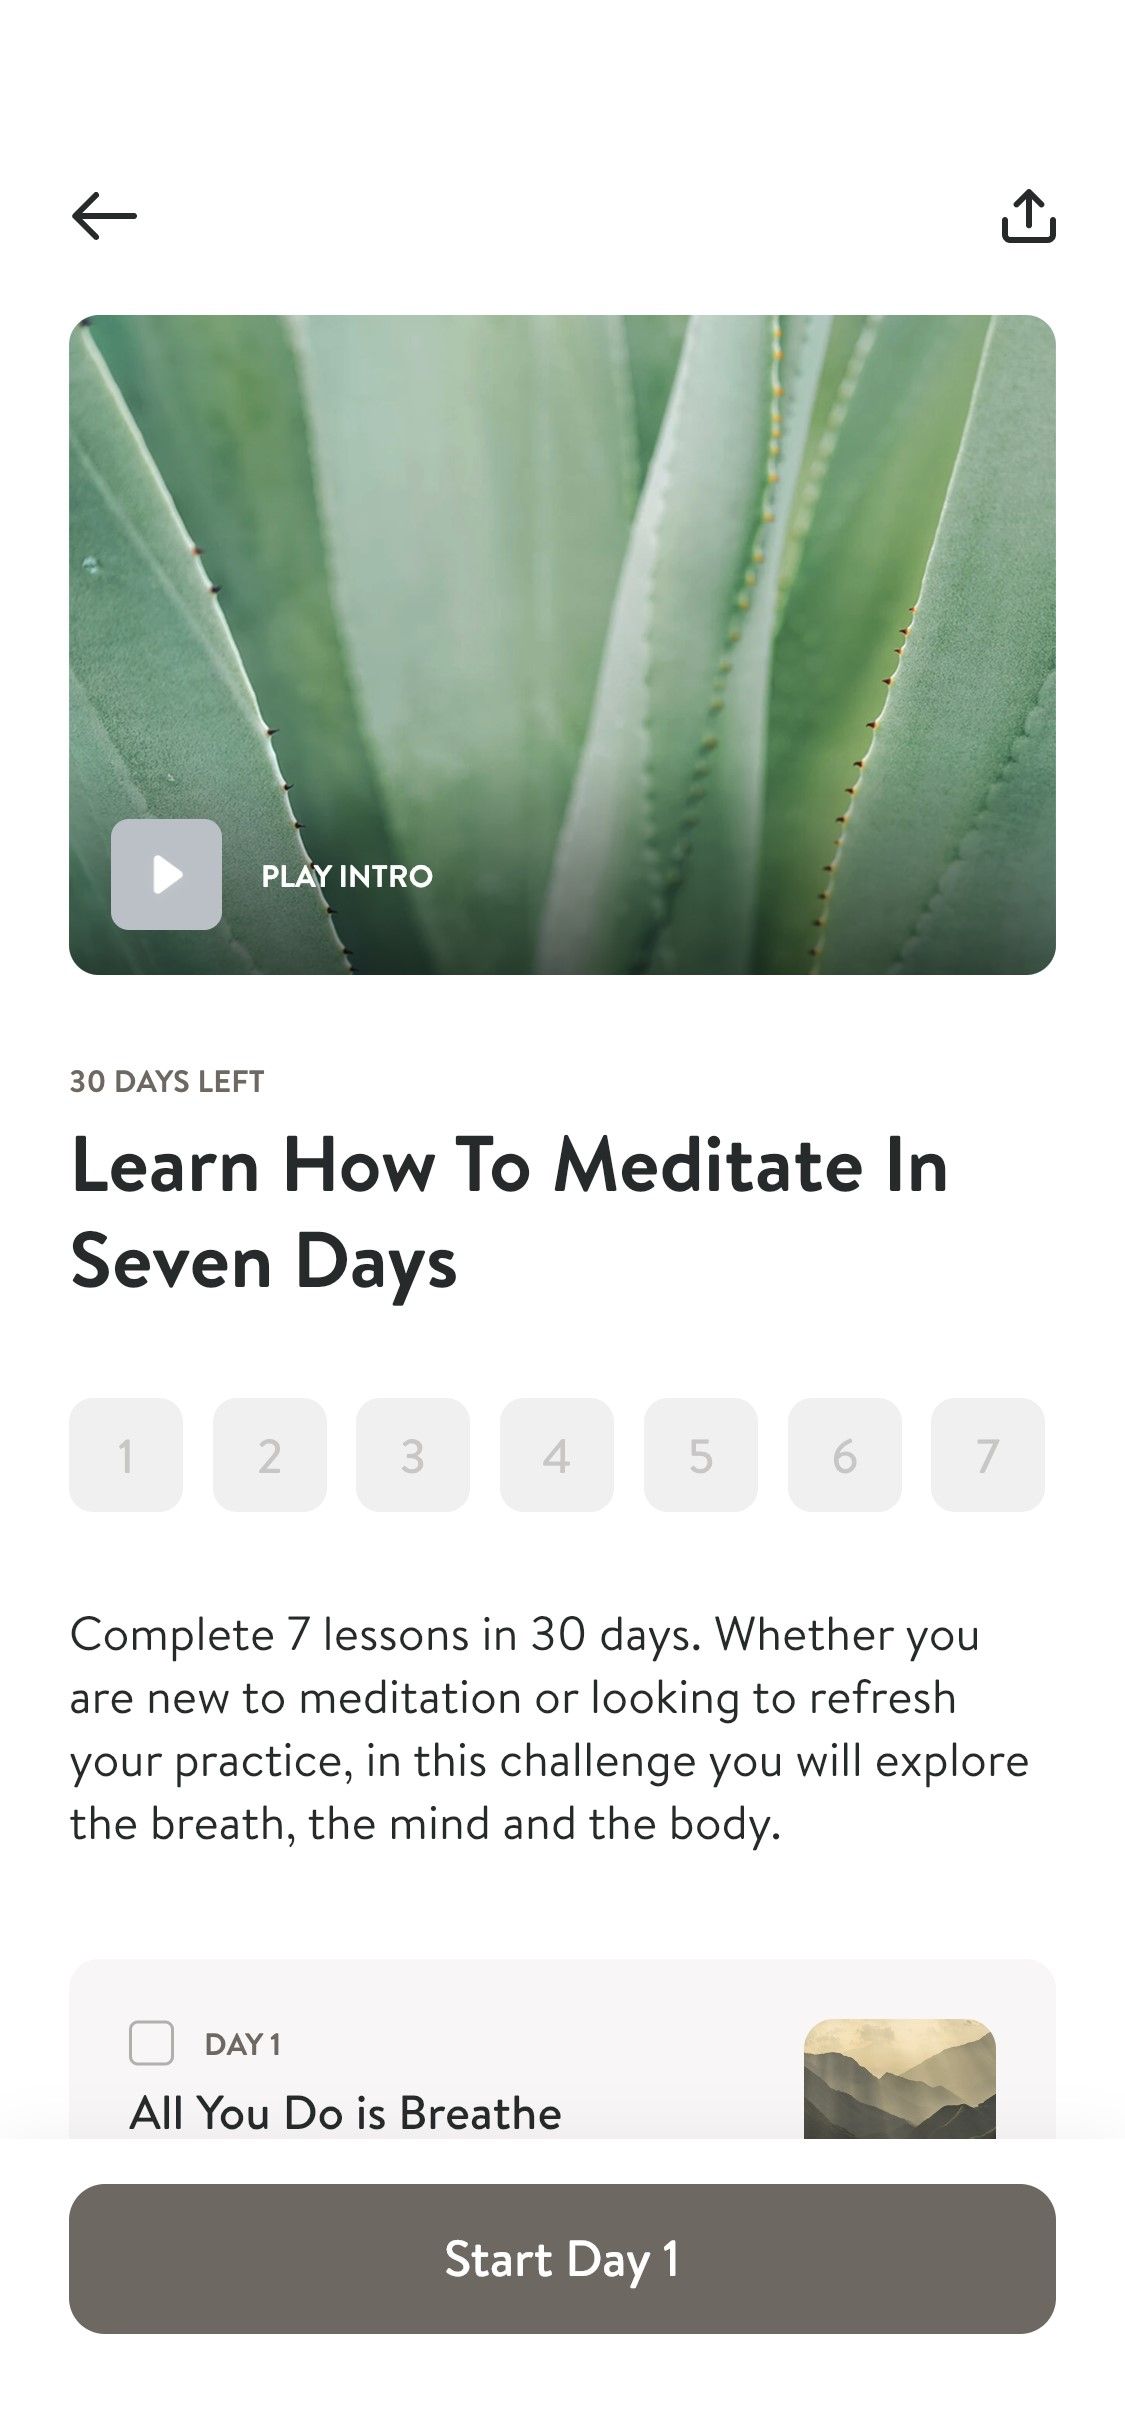 Use Insight Timer to Meditate on Finding Your Purpose